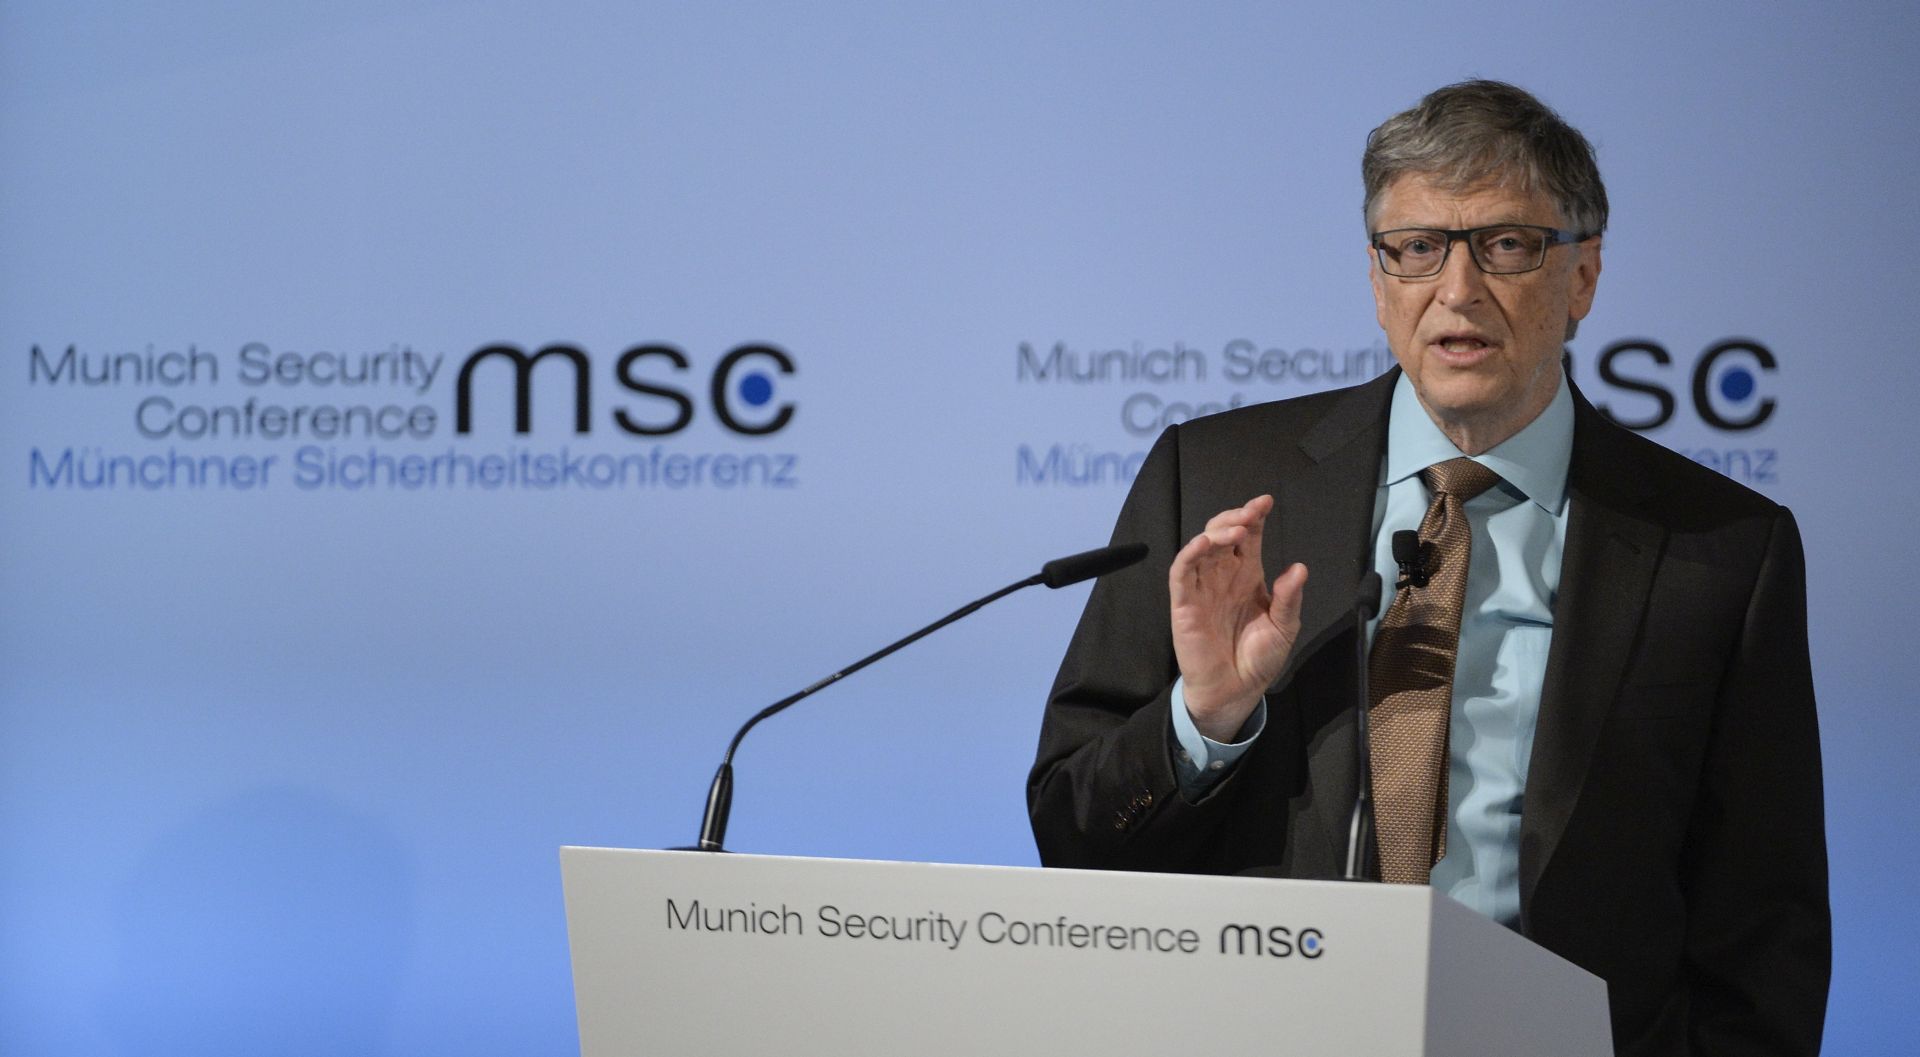 epa05801794 Microsoft founder Bill Gates speaks during the 53rd Munich Security Conference (MSC) in Munich, Germany, 18 February 2017. In their annual meeting, politicians and various experts and guests from around the world discuss issues surrounding global security from February 17 to 19.  EPA/PHILIPP GUELLAND